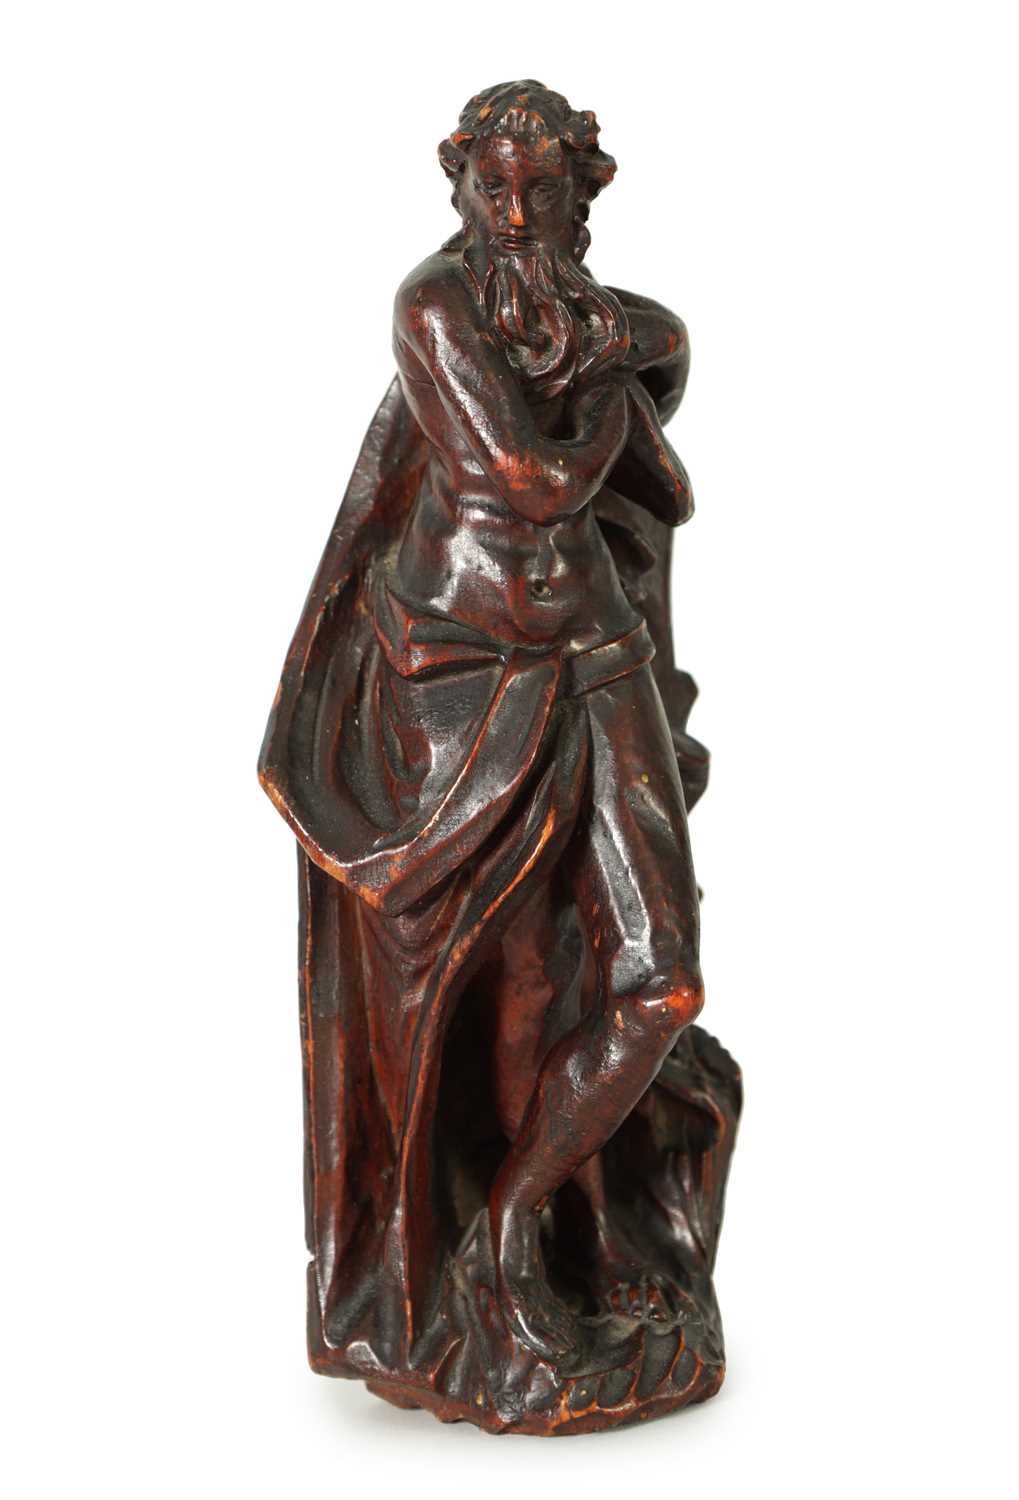 AN 18TH CENTURY CARVED WOOD ALLEGORICAL FIGURE